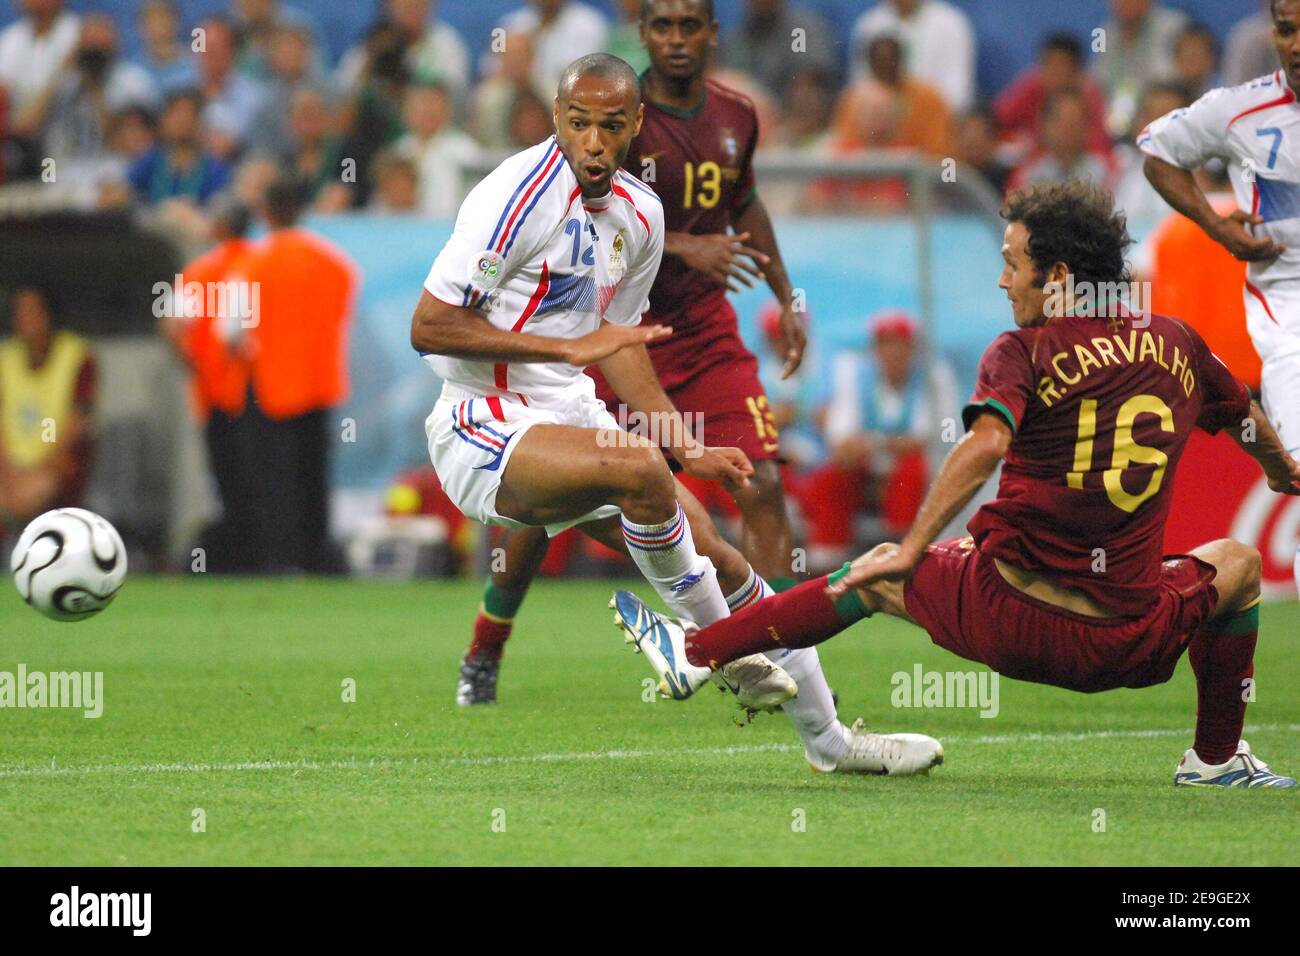 Portugal's Alberto Ricardo Carvalho fouls France's Thierry Henry giving away a penalty during the World Cup 2006, semi-final, France vs Portugal at the Allianz-Arena stadium in Munich, Germany on July 5, 2006. France won 1-0 and advanced to the final. Photo by Gouhier-Hahn-Orban/Cameleon/ABACAPRESS.COM Stock Photo